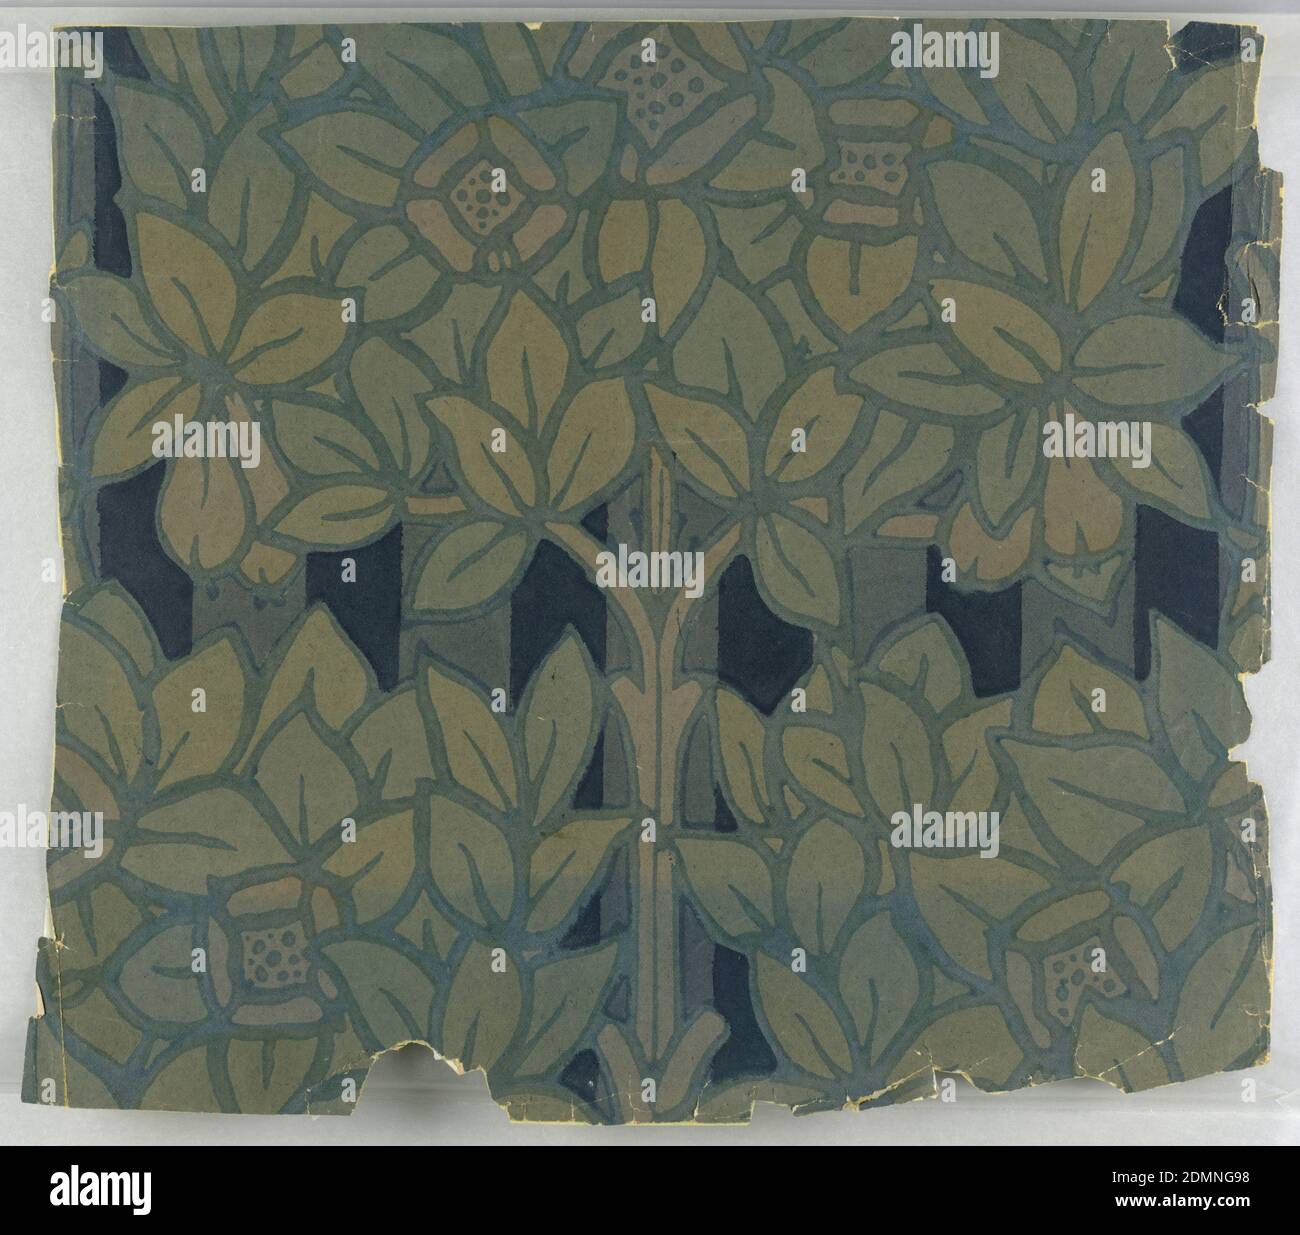 Sidewall, Machine-printed and embossed, Art nouveau floral and foliate in large scale, printed in shades of blue., Chicago, Illinois, USA, 1914, Wallcoverings, Sidewall Stock Photo